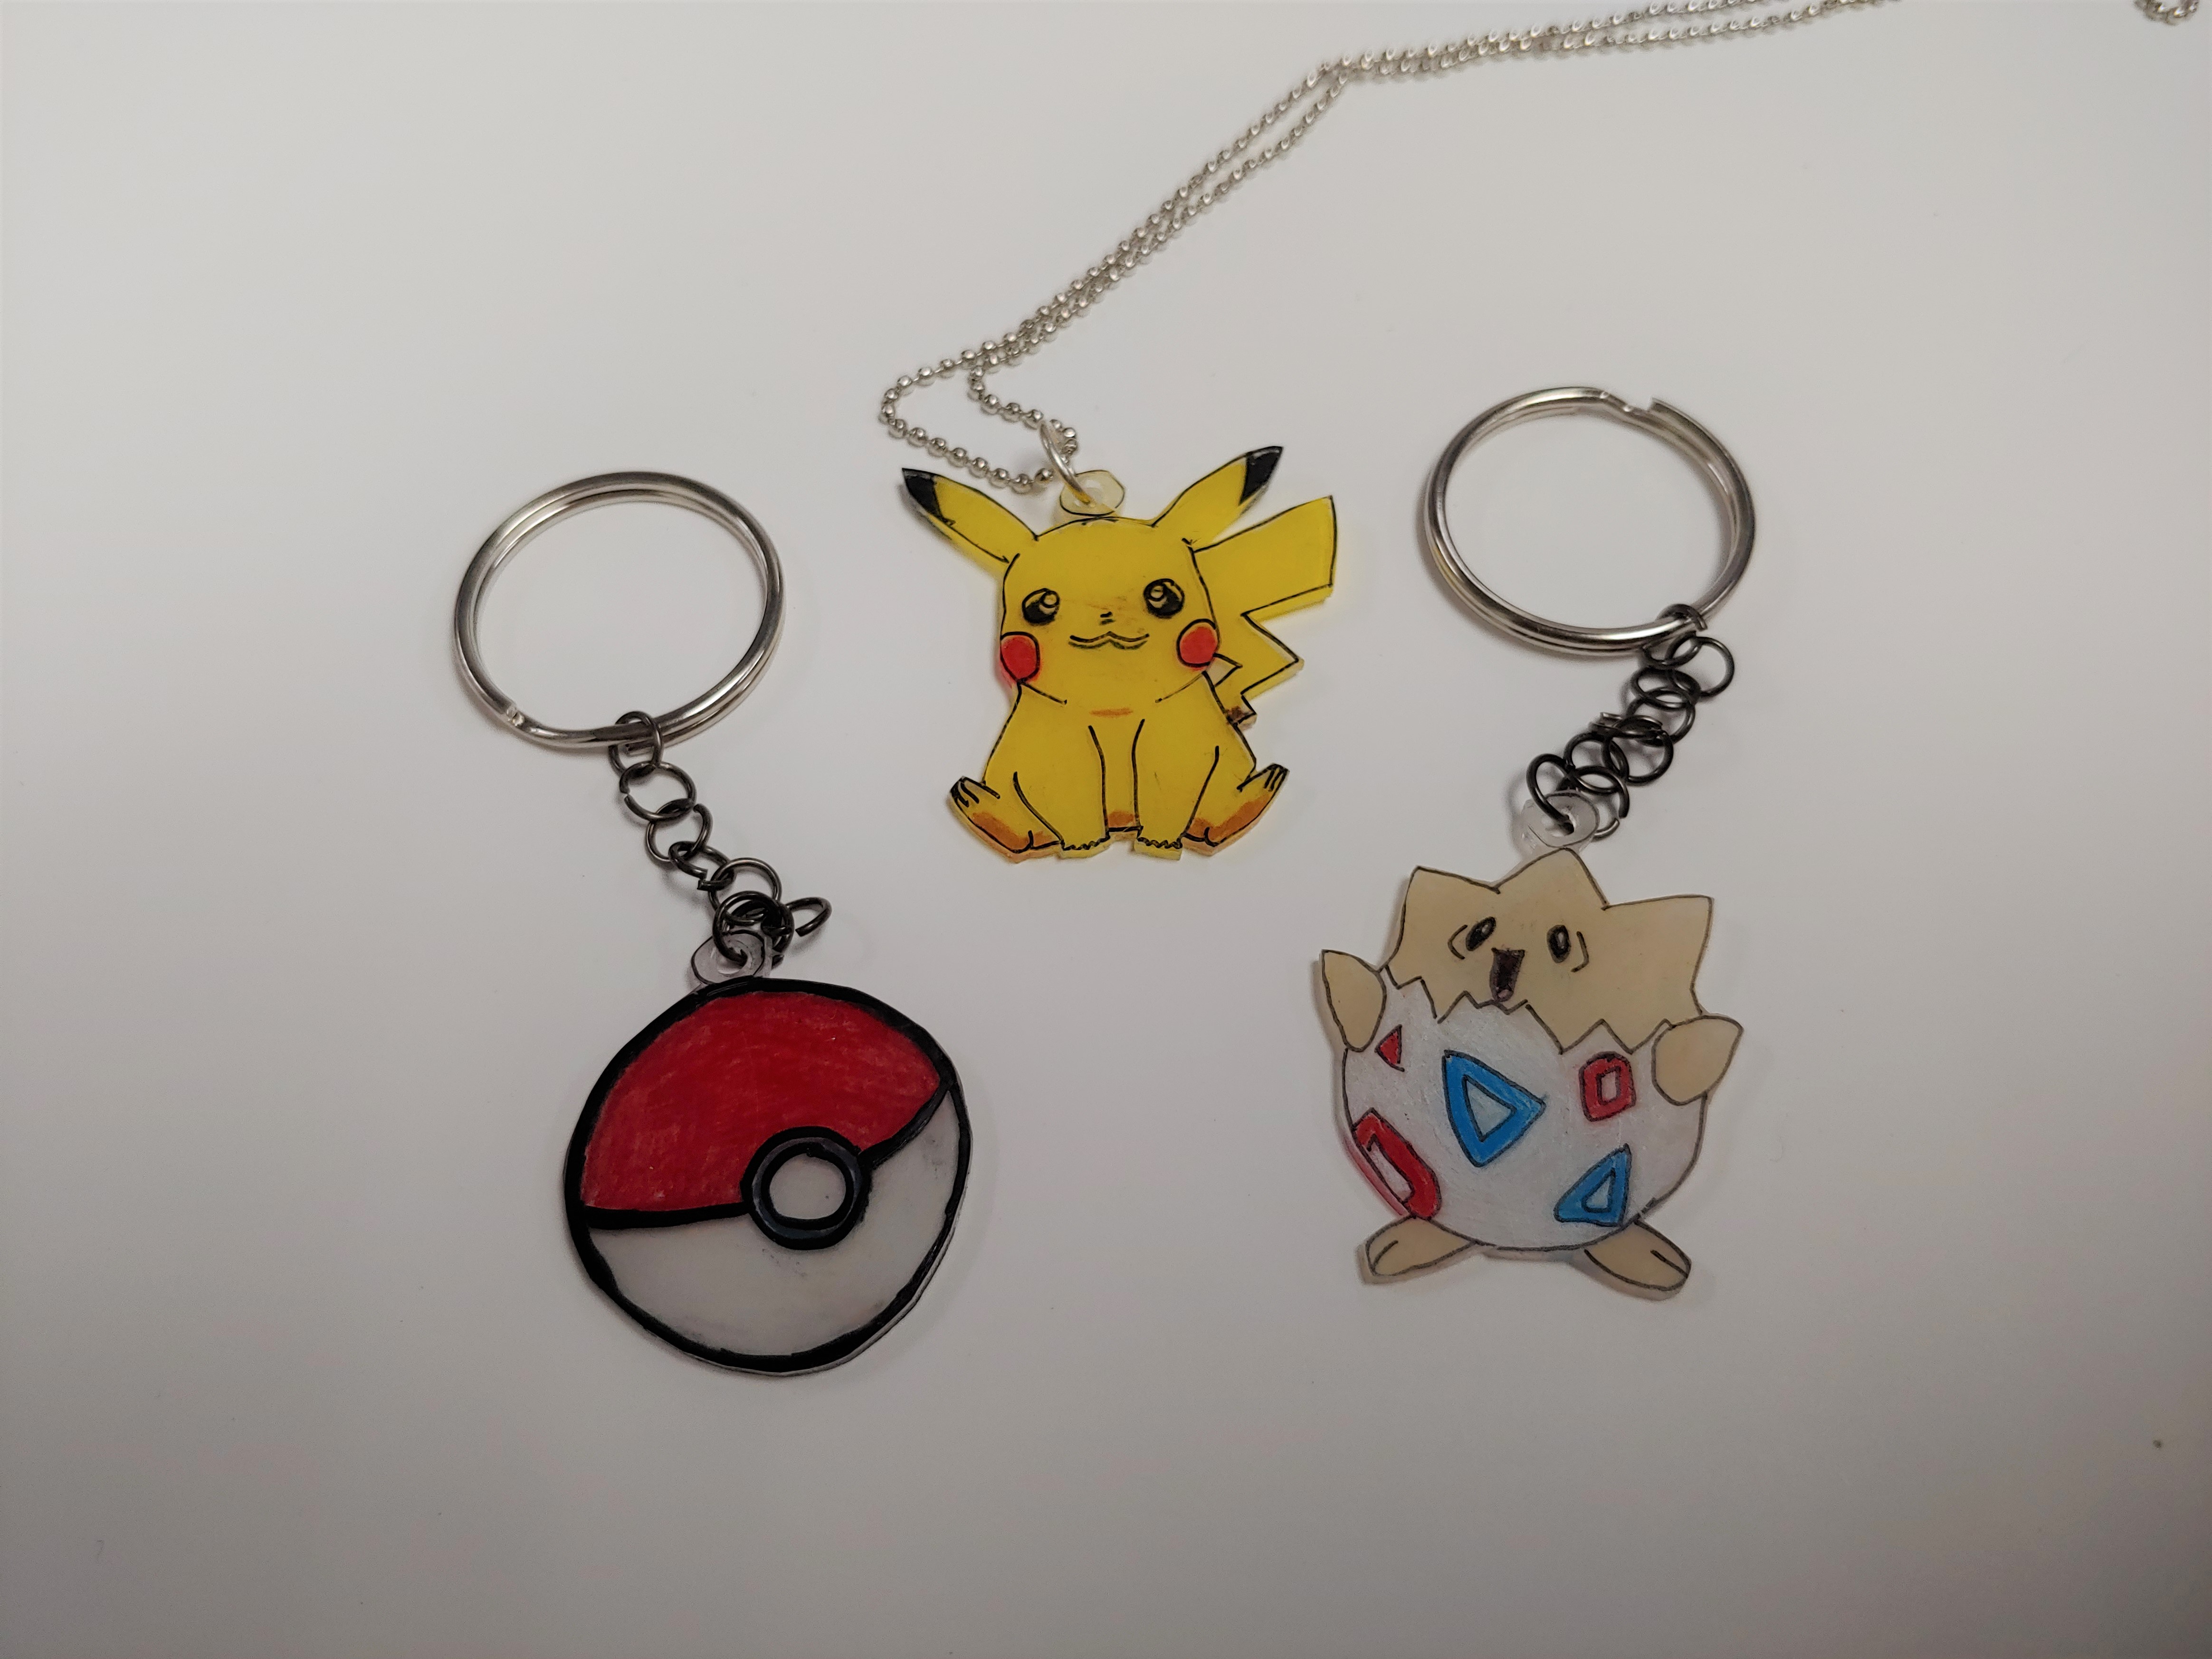 Shrinky Dink keychain and necklace of Pokeball, Pikachu, and Togepi